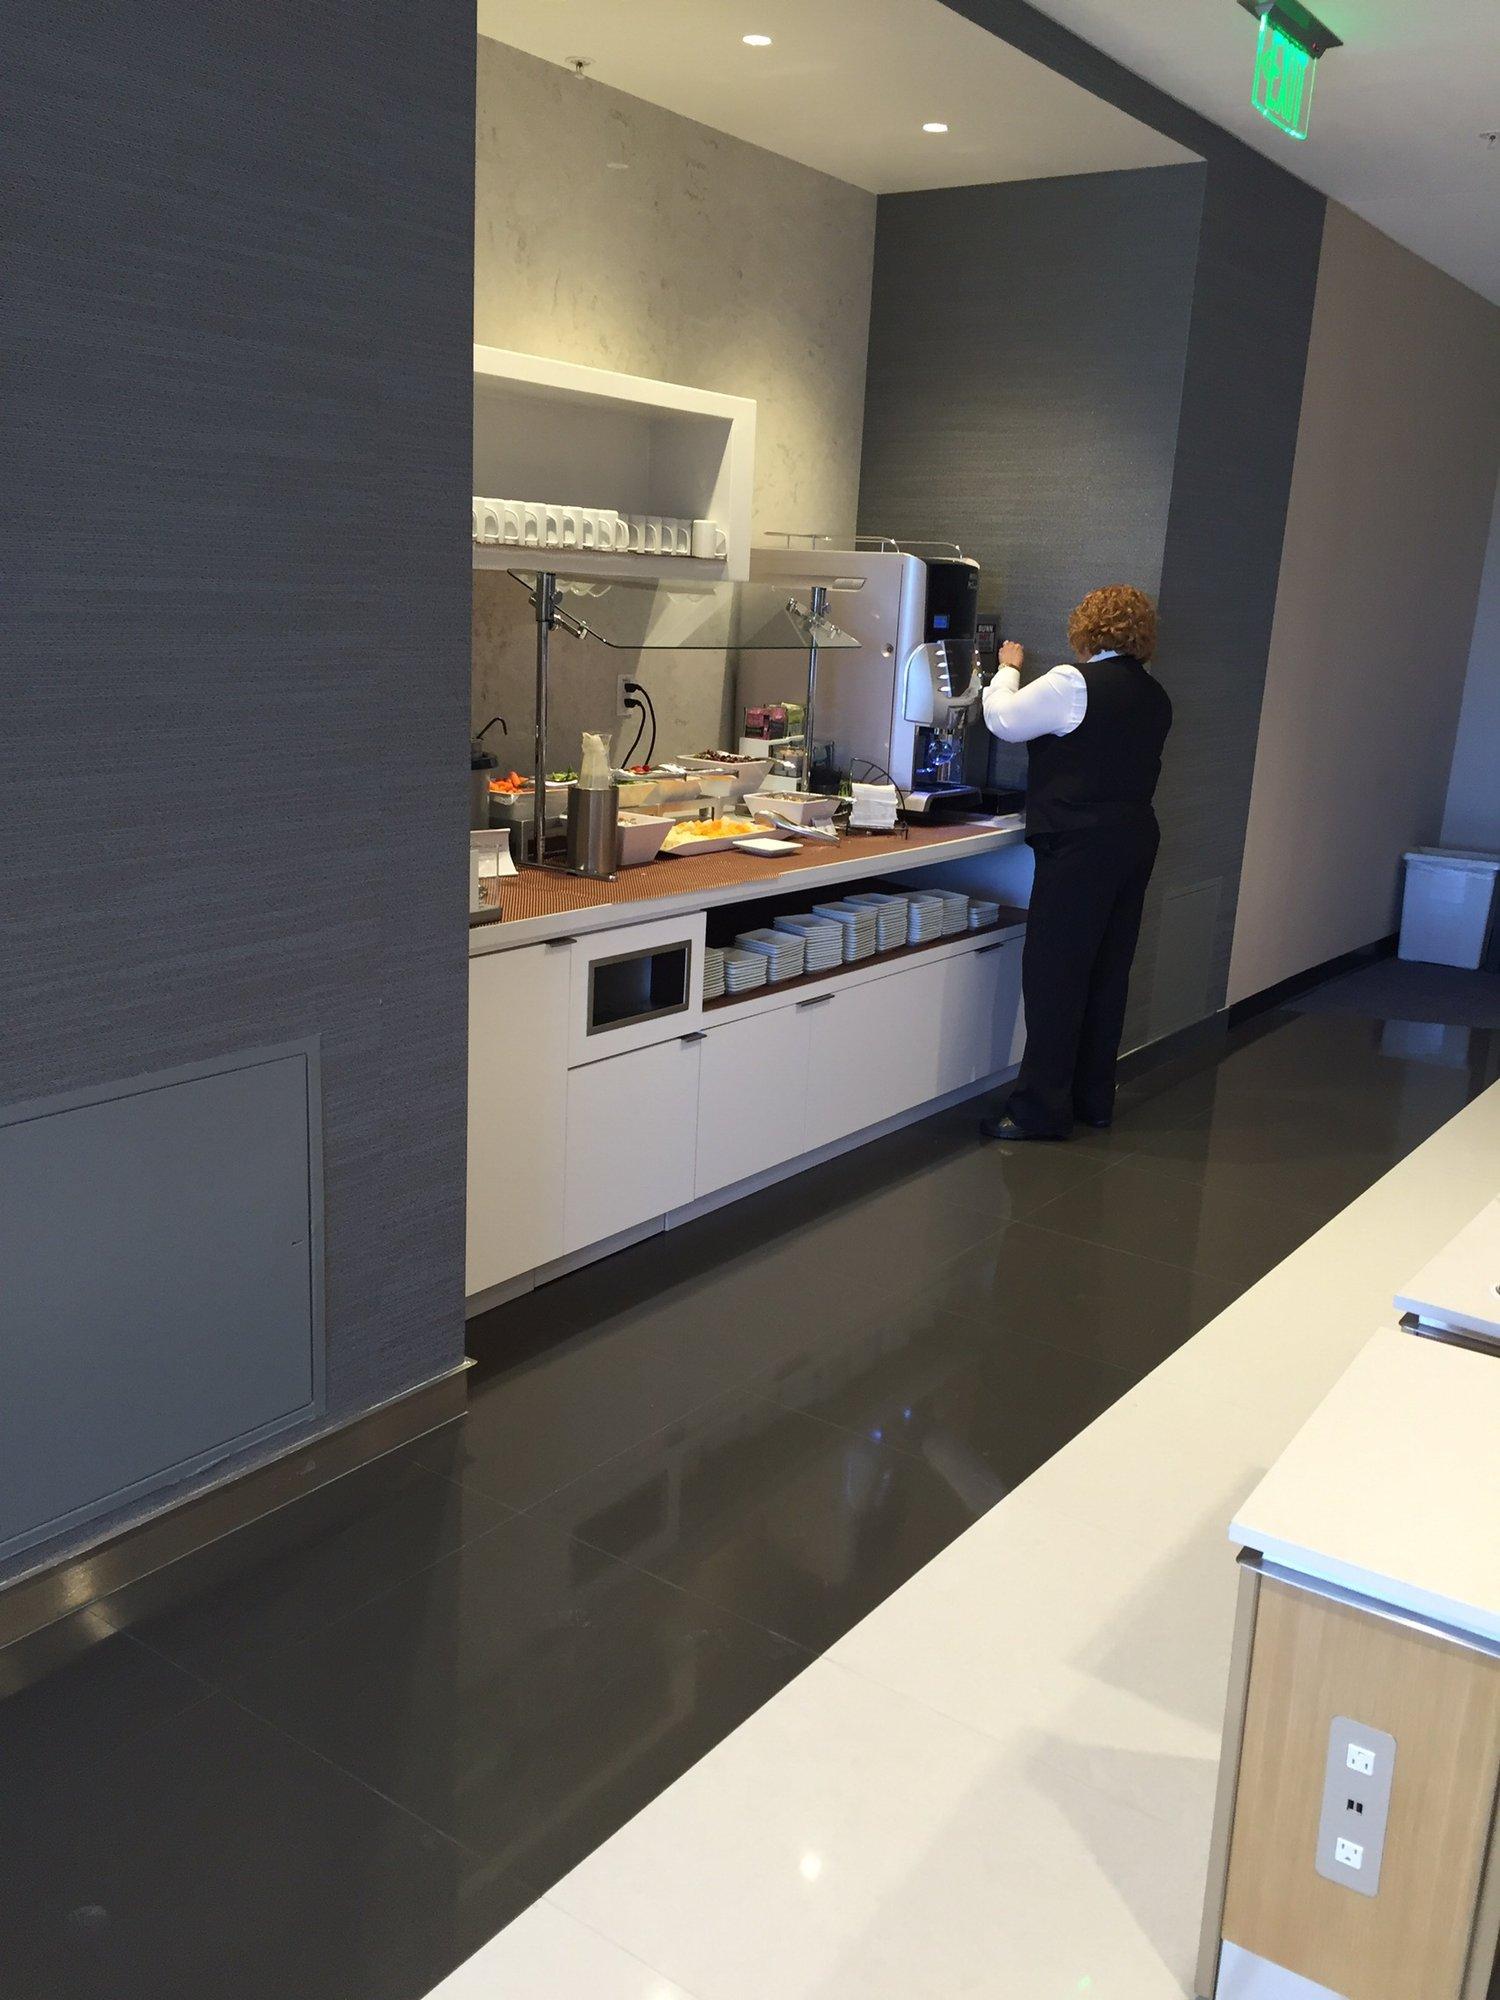 American Airlines Admirals Club (Gate D15) image 5 of 25